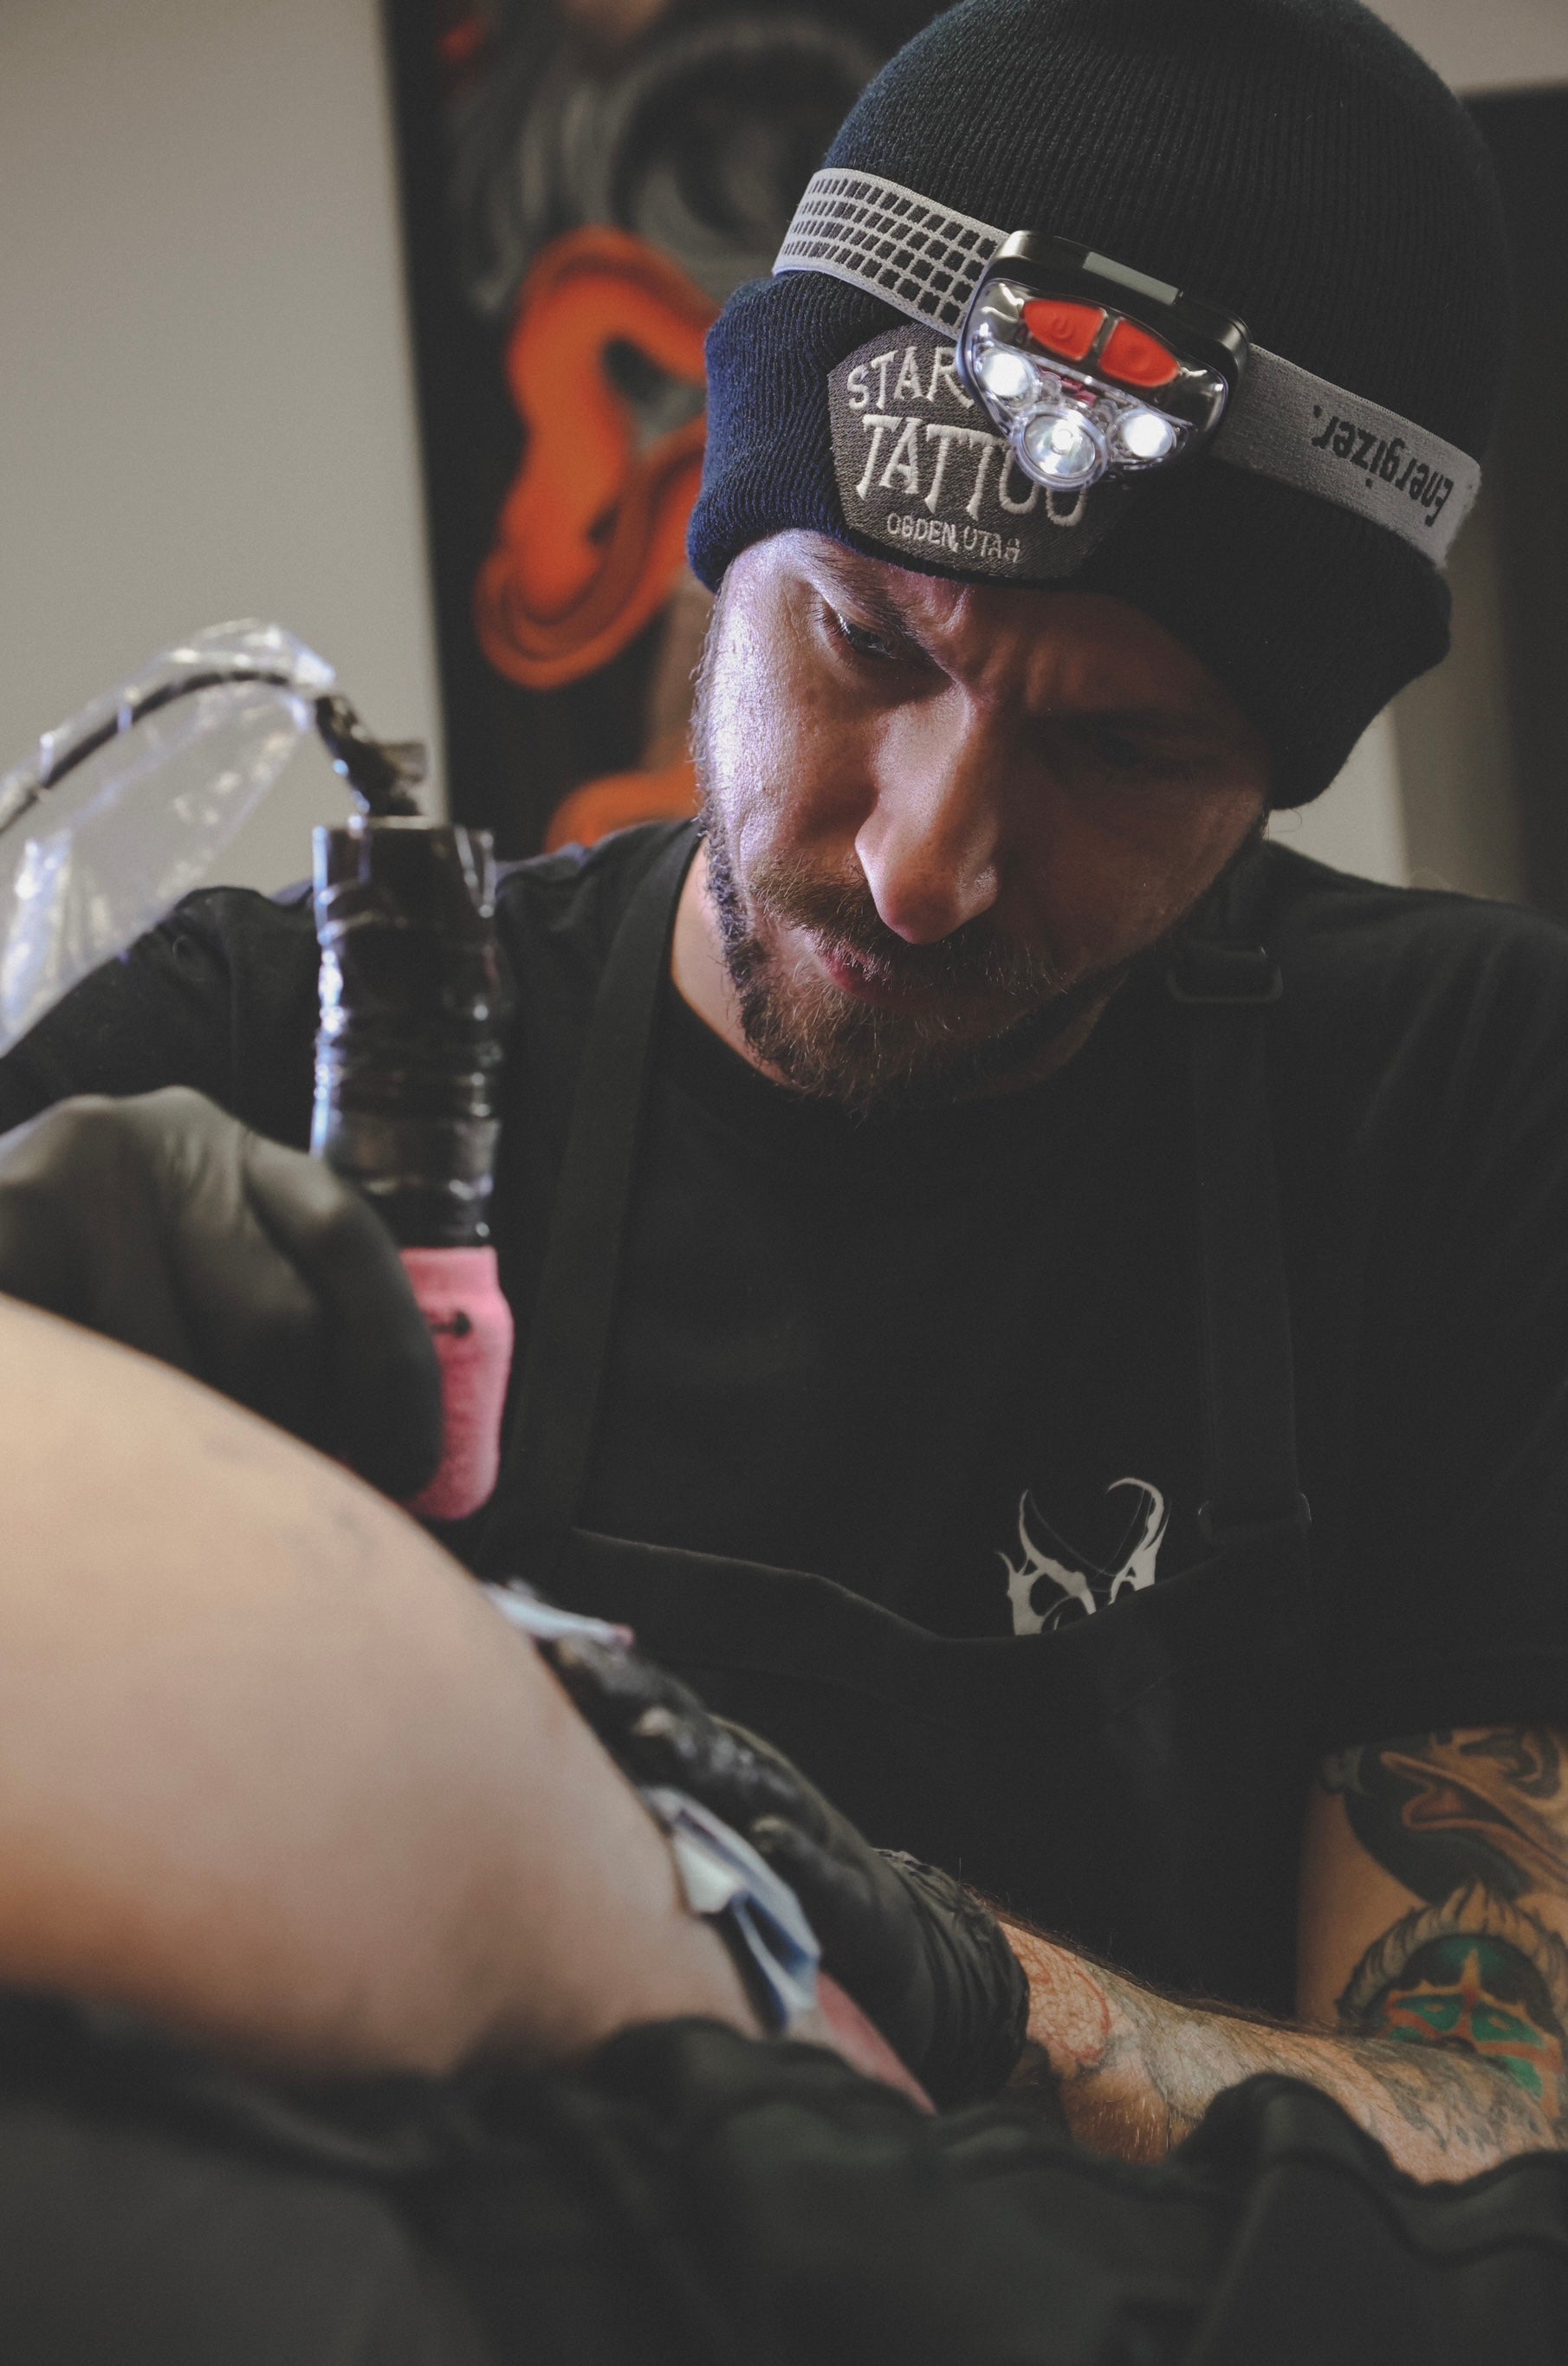 New tattoo studio opens in downtown Duluth - Duluth News Tribune | News,  weather, and sports from Duluth, Minnesota